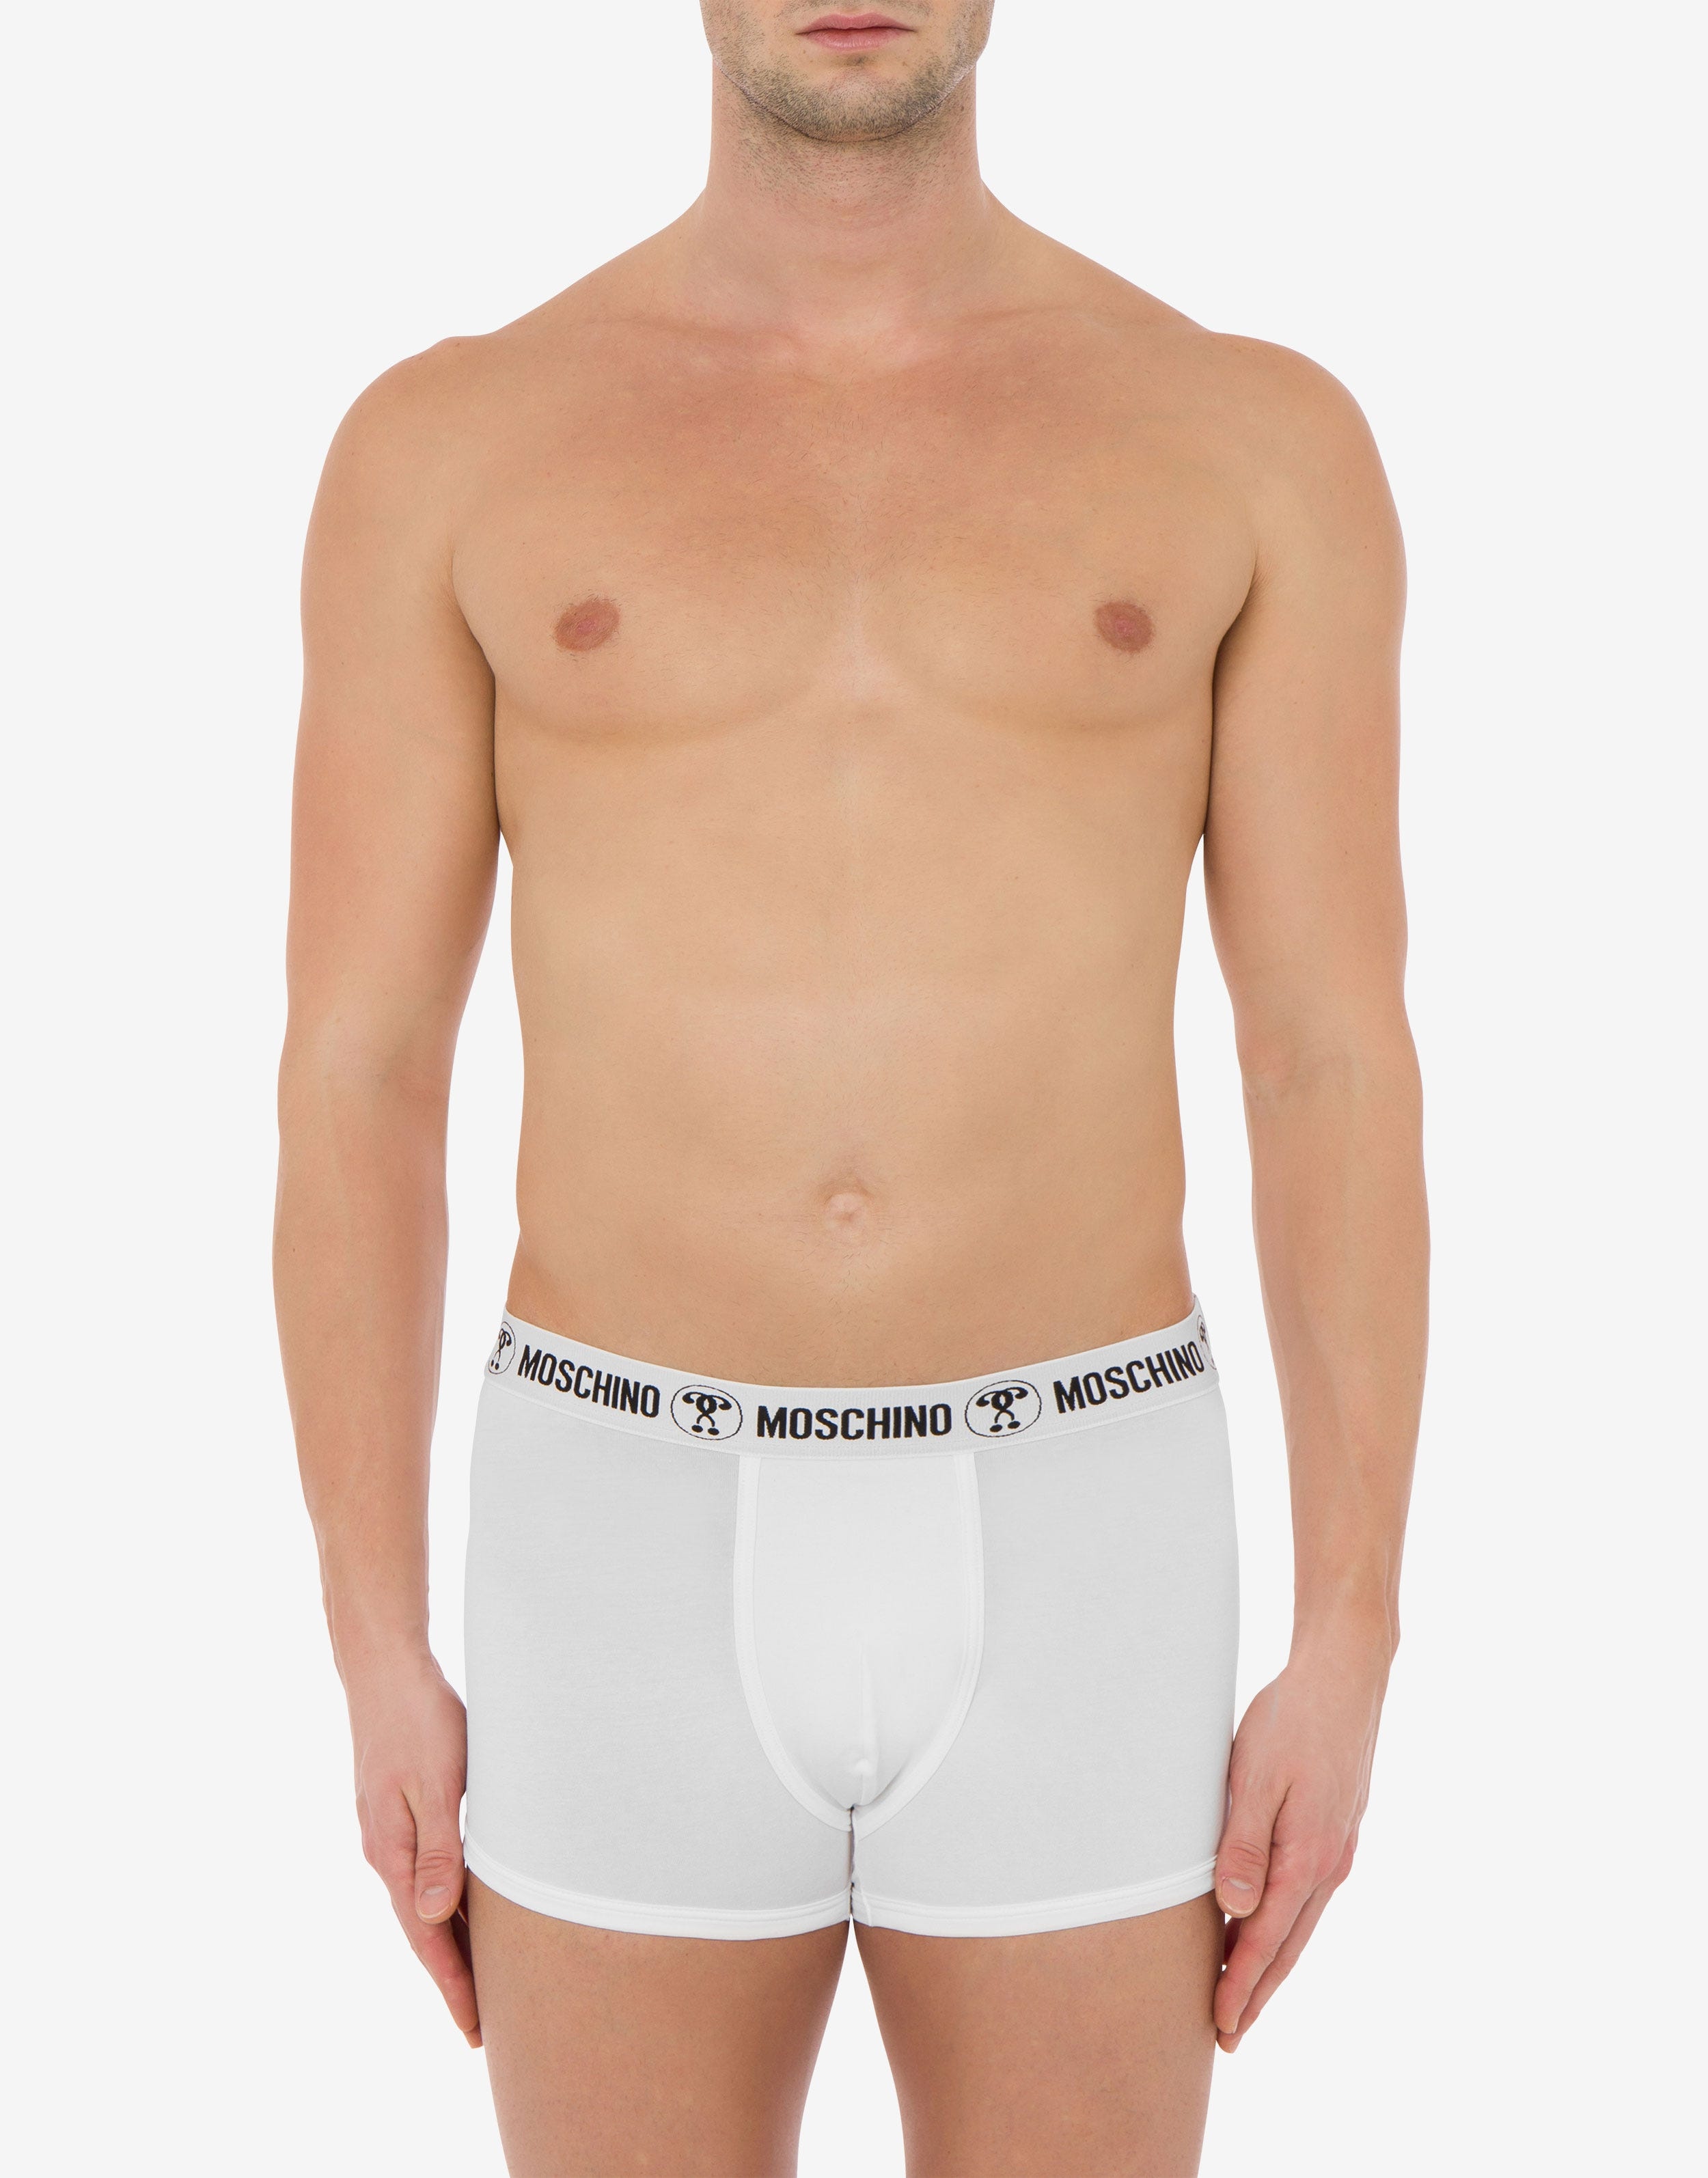 DOUBLE QUESTION MARK JERSEY BOXER - 2